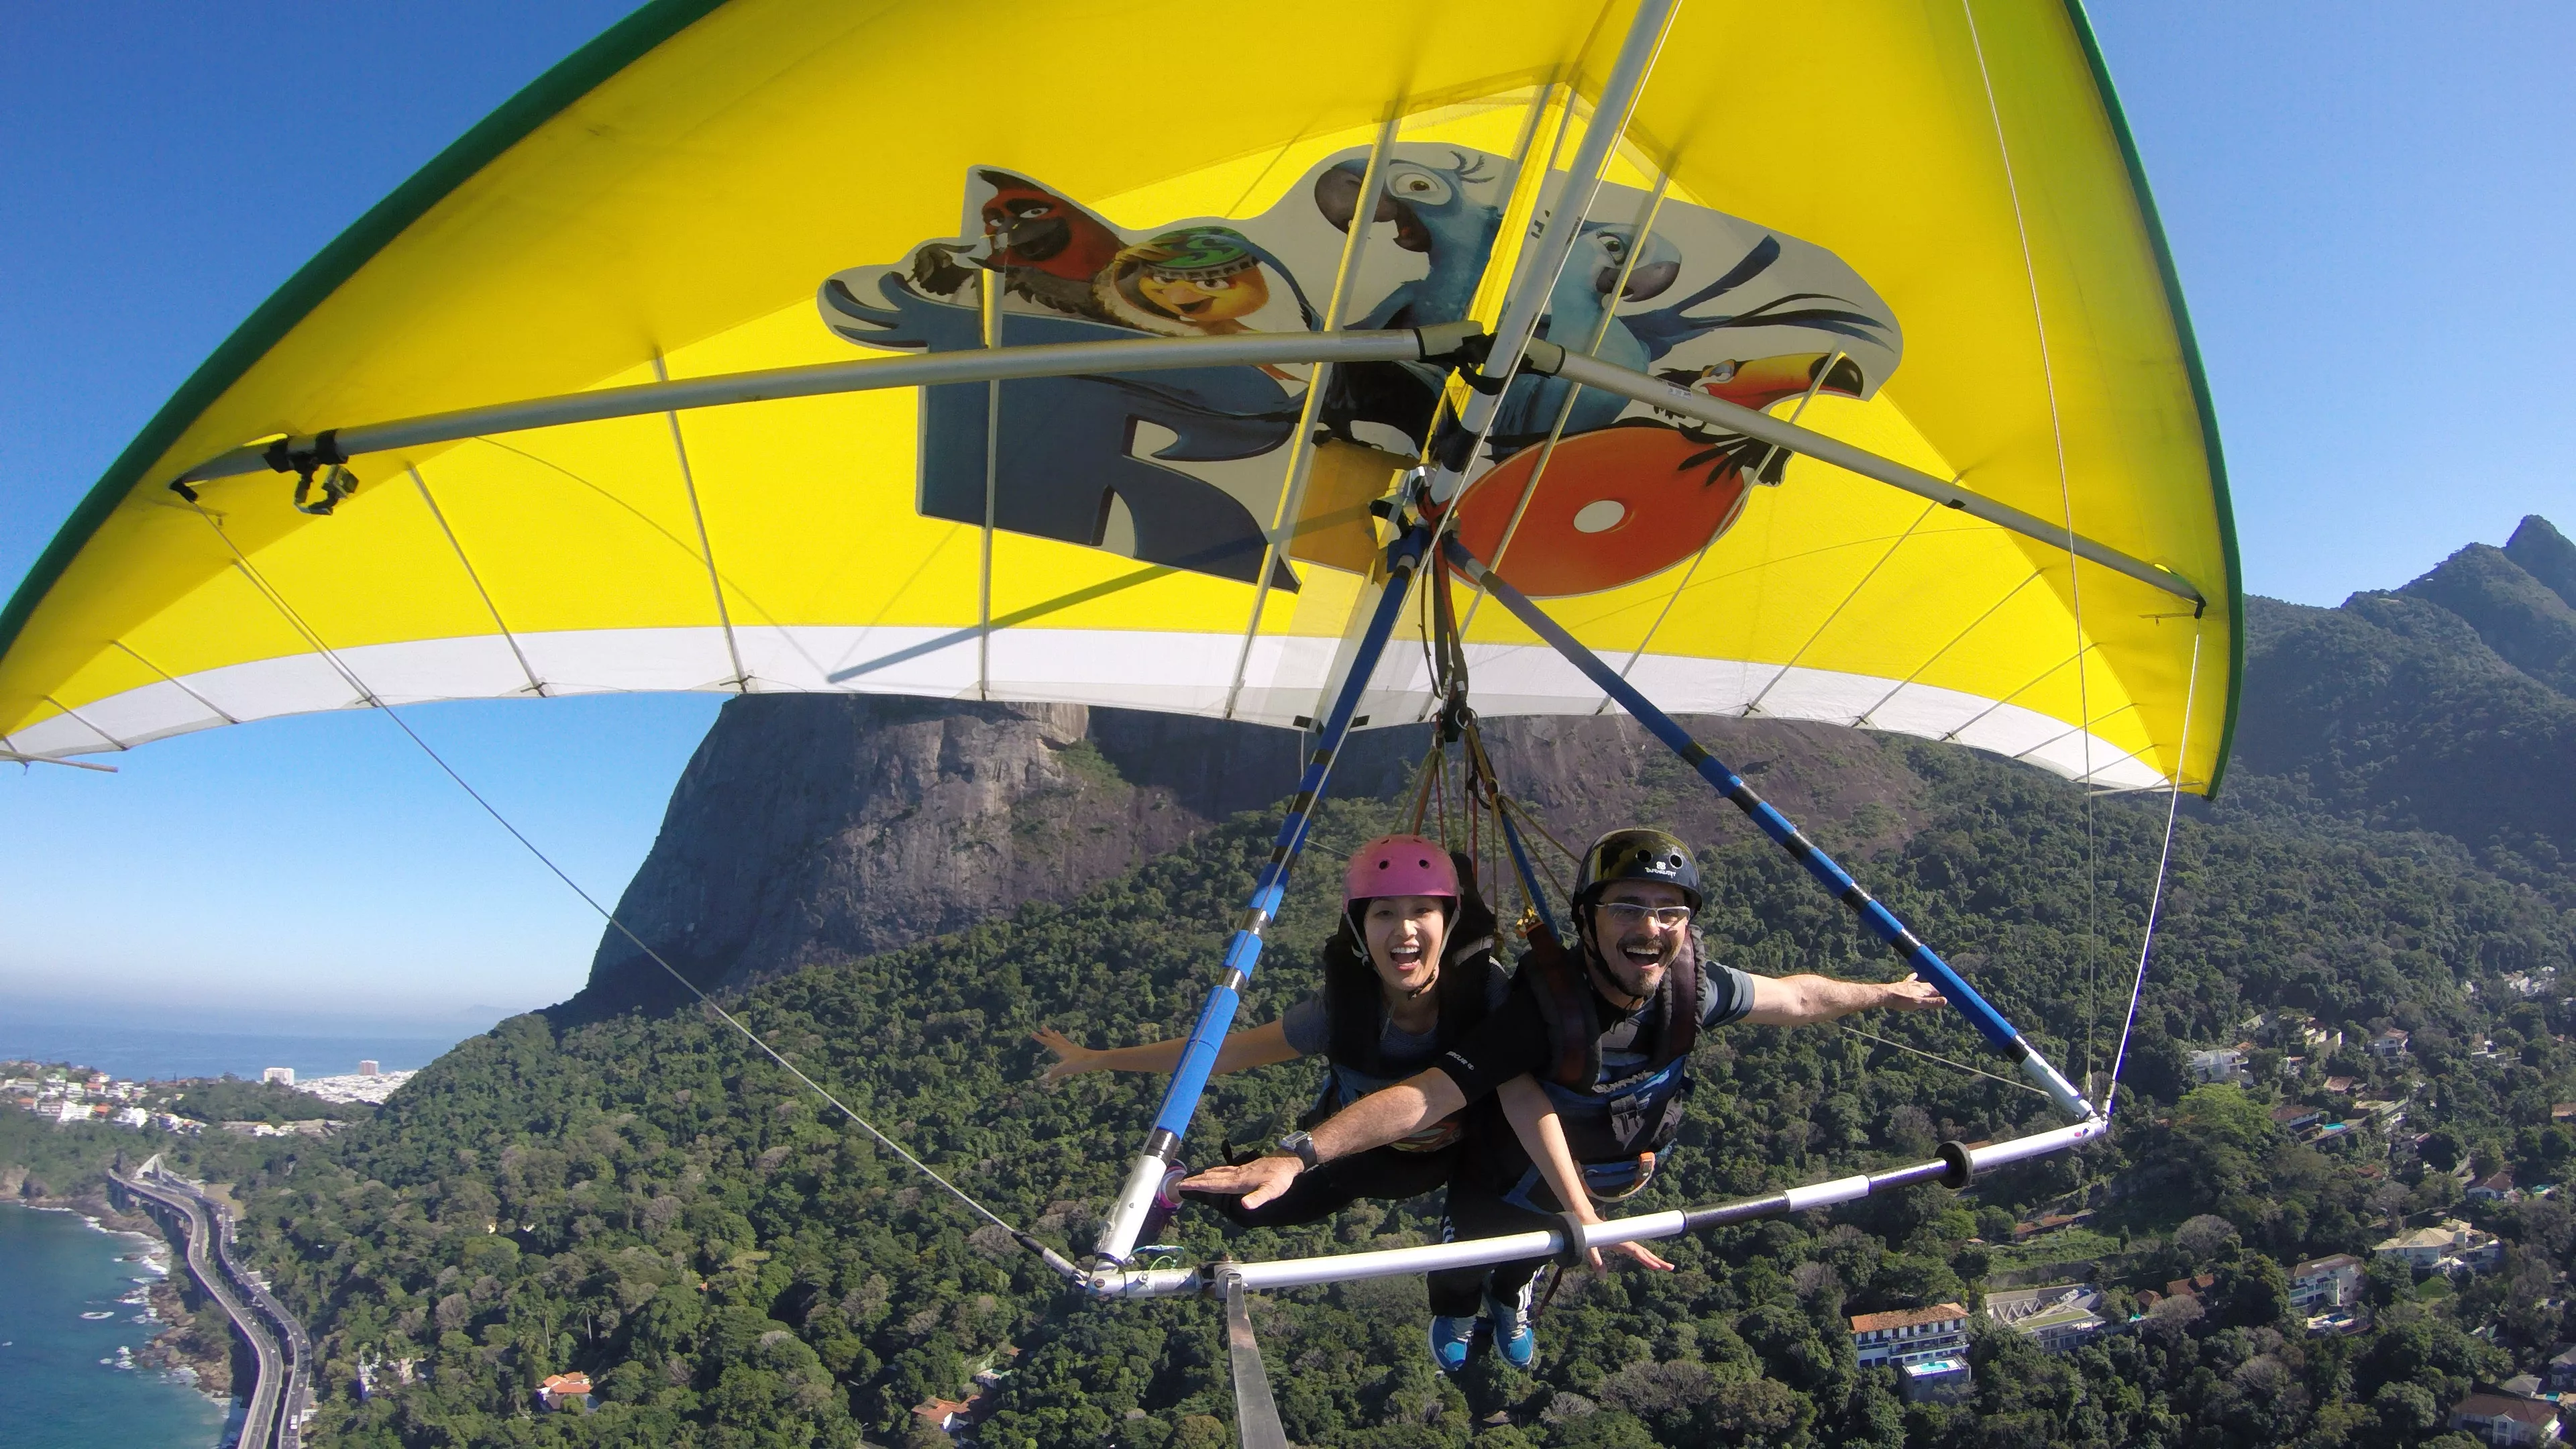 Rio Hang Gliding in Brazil, South America | Hang Gliding - Rated 0.8